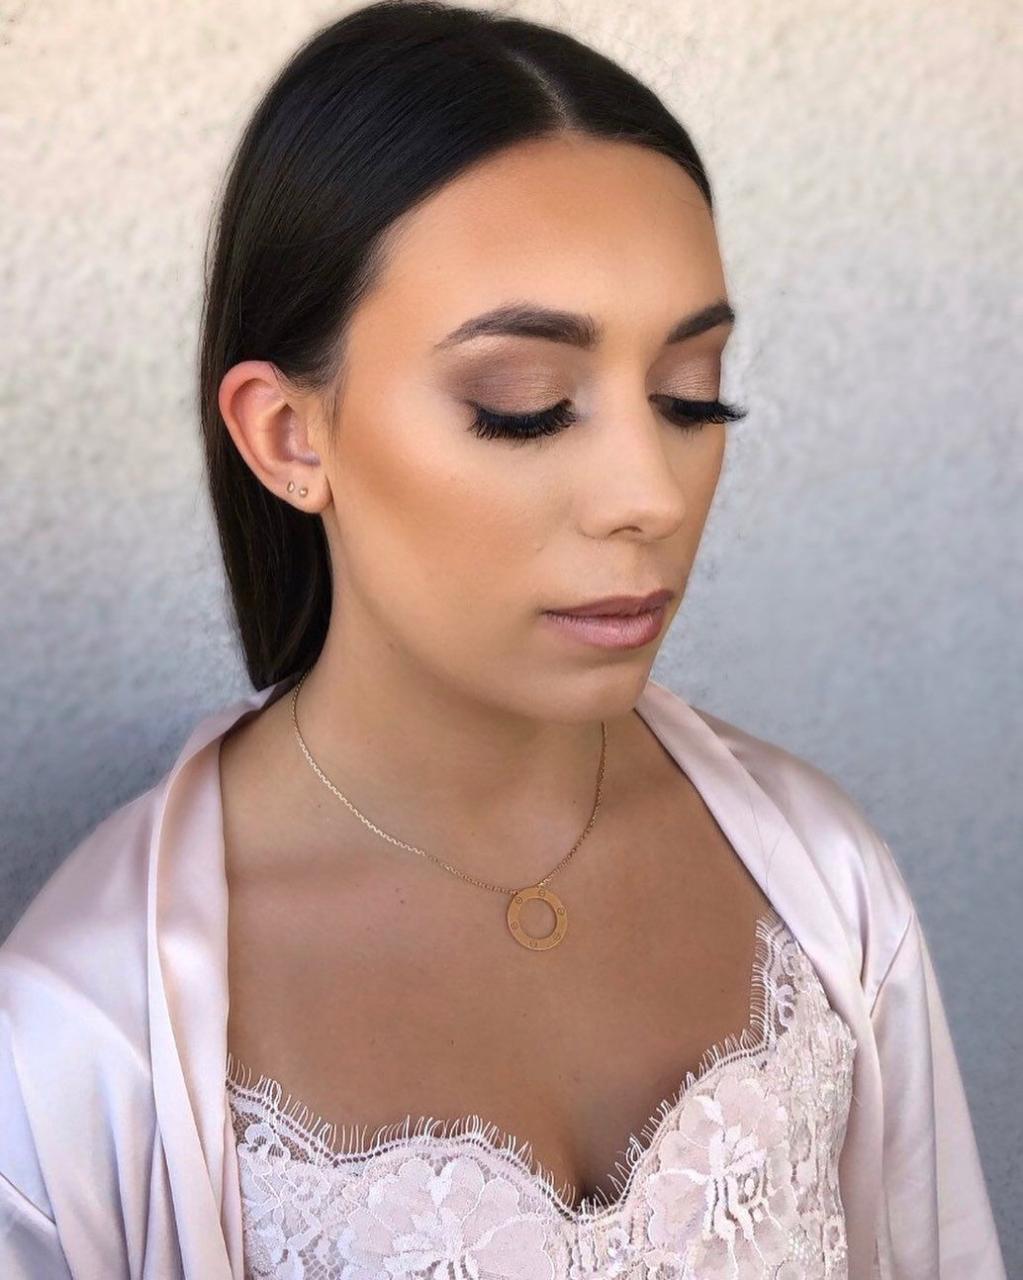 30 Bridesmaid Makeup Looks Your Friends Will Love